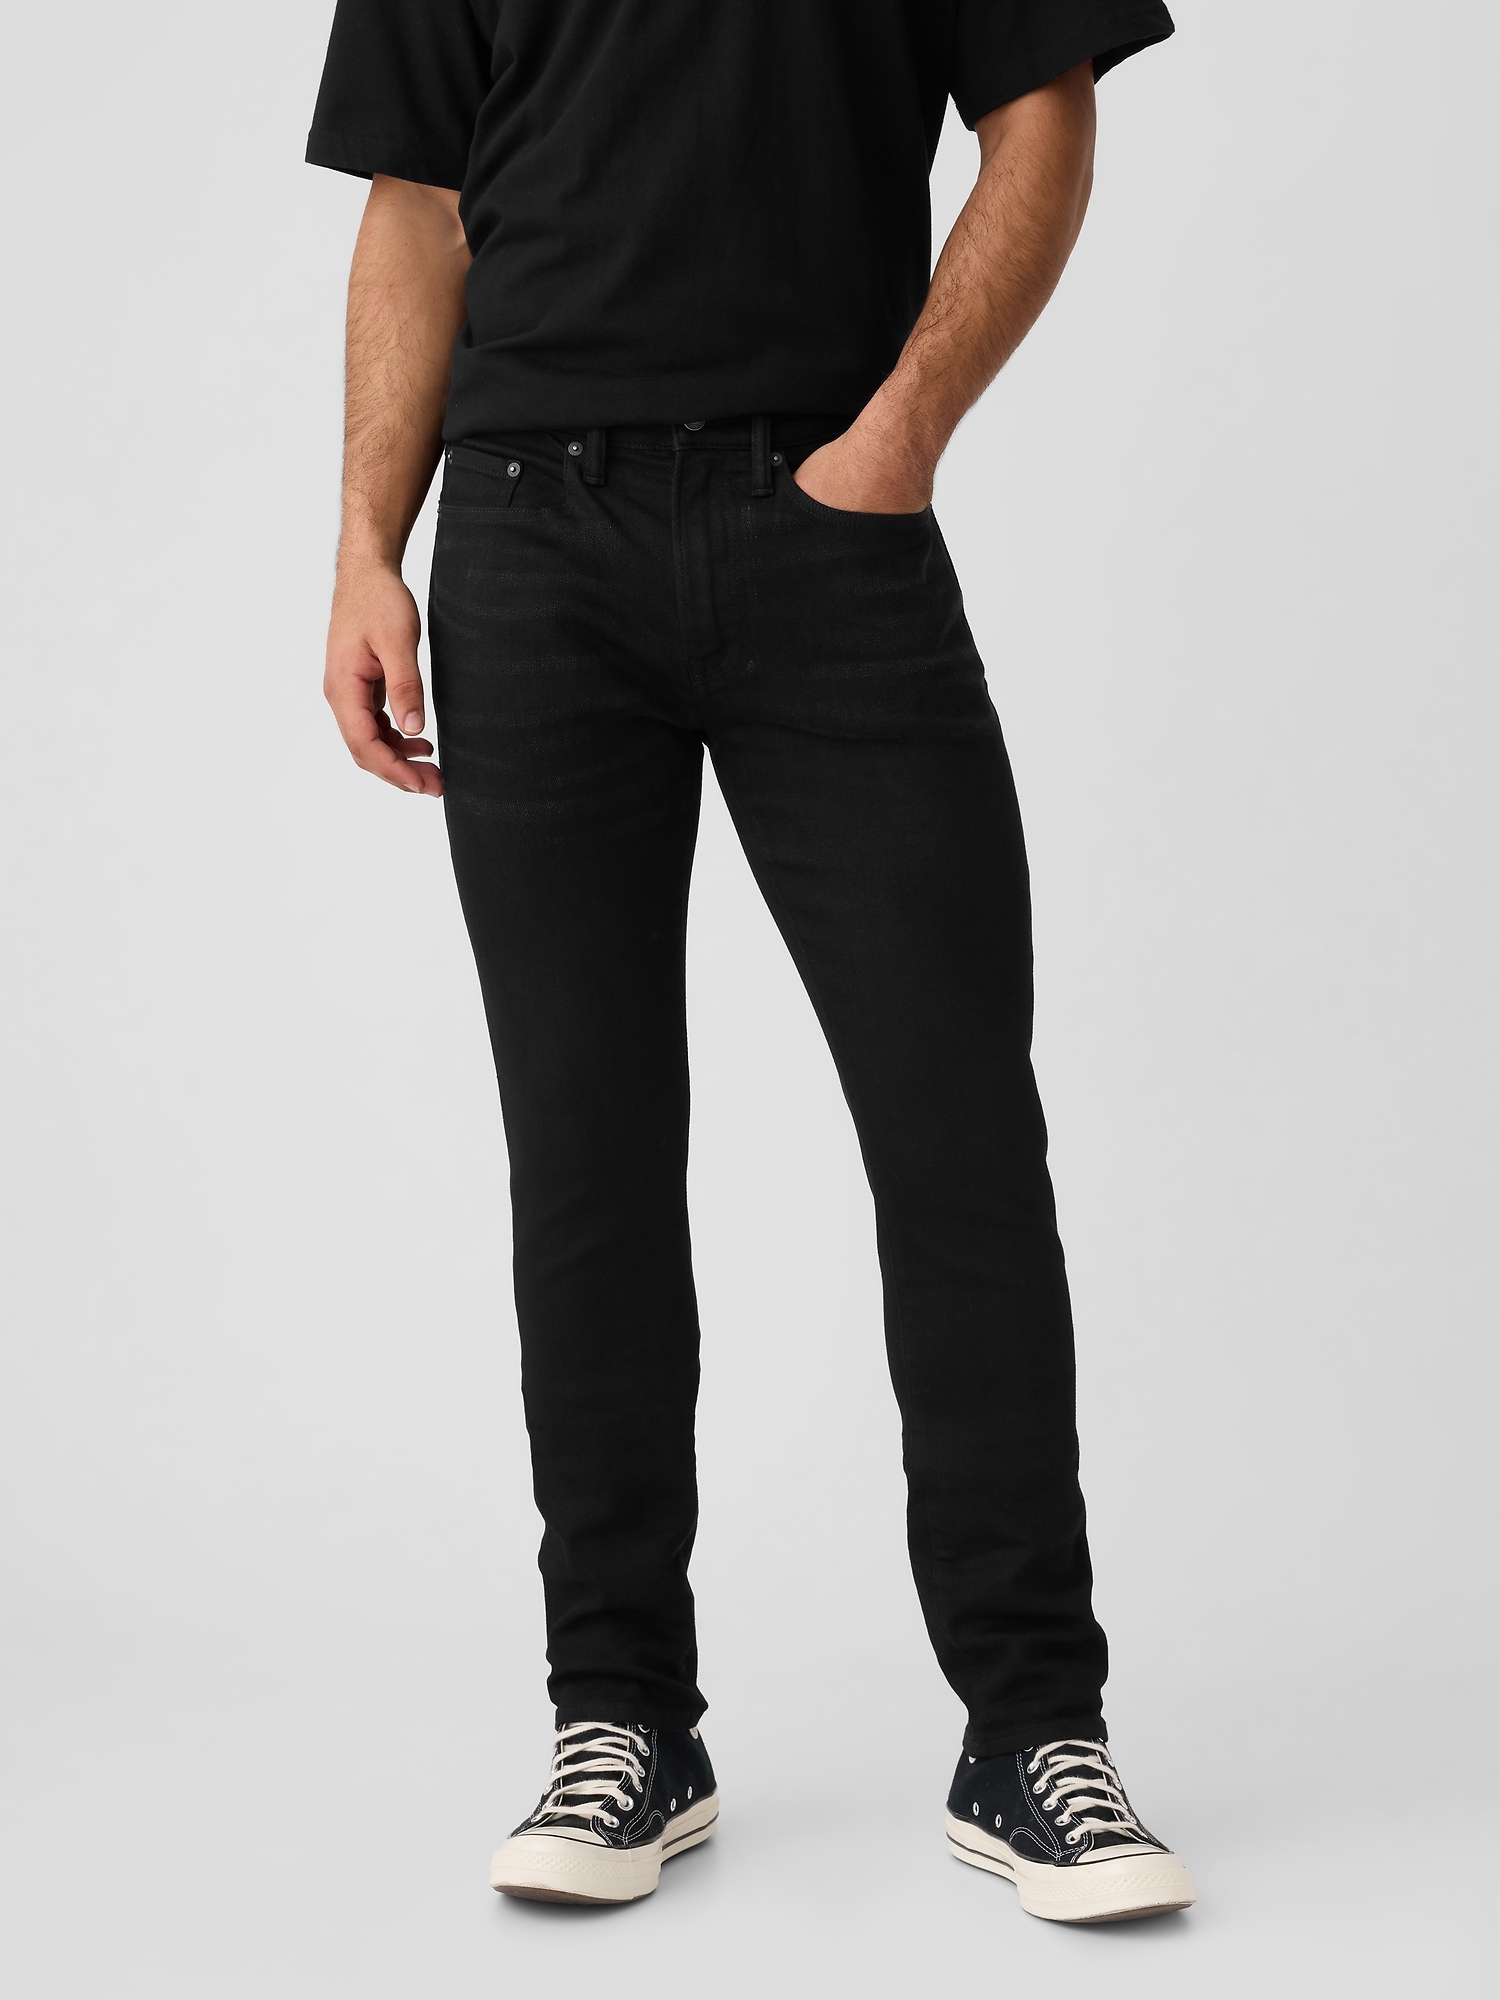 Buy Gap Black Stretch Slim Fit Soft Wear Jeans from the Next UK